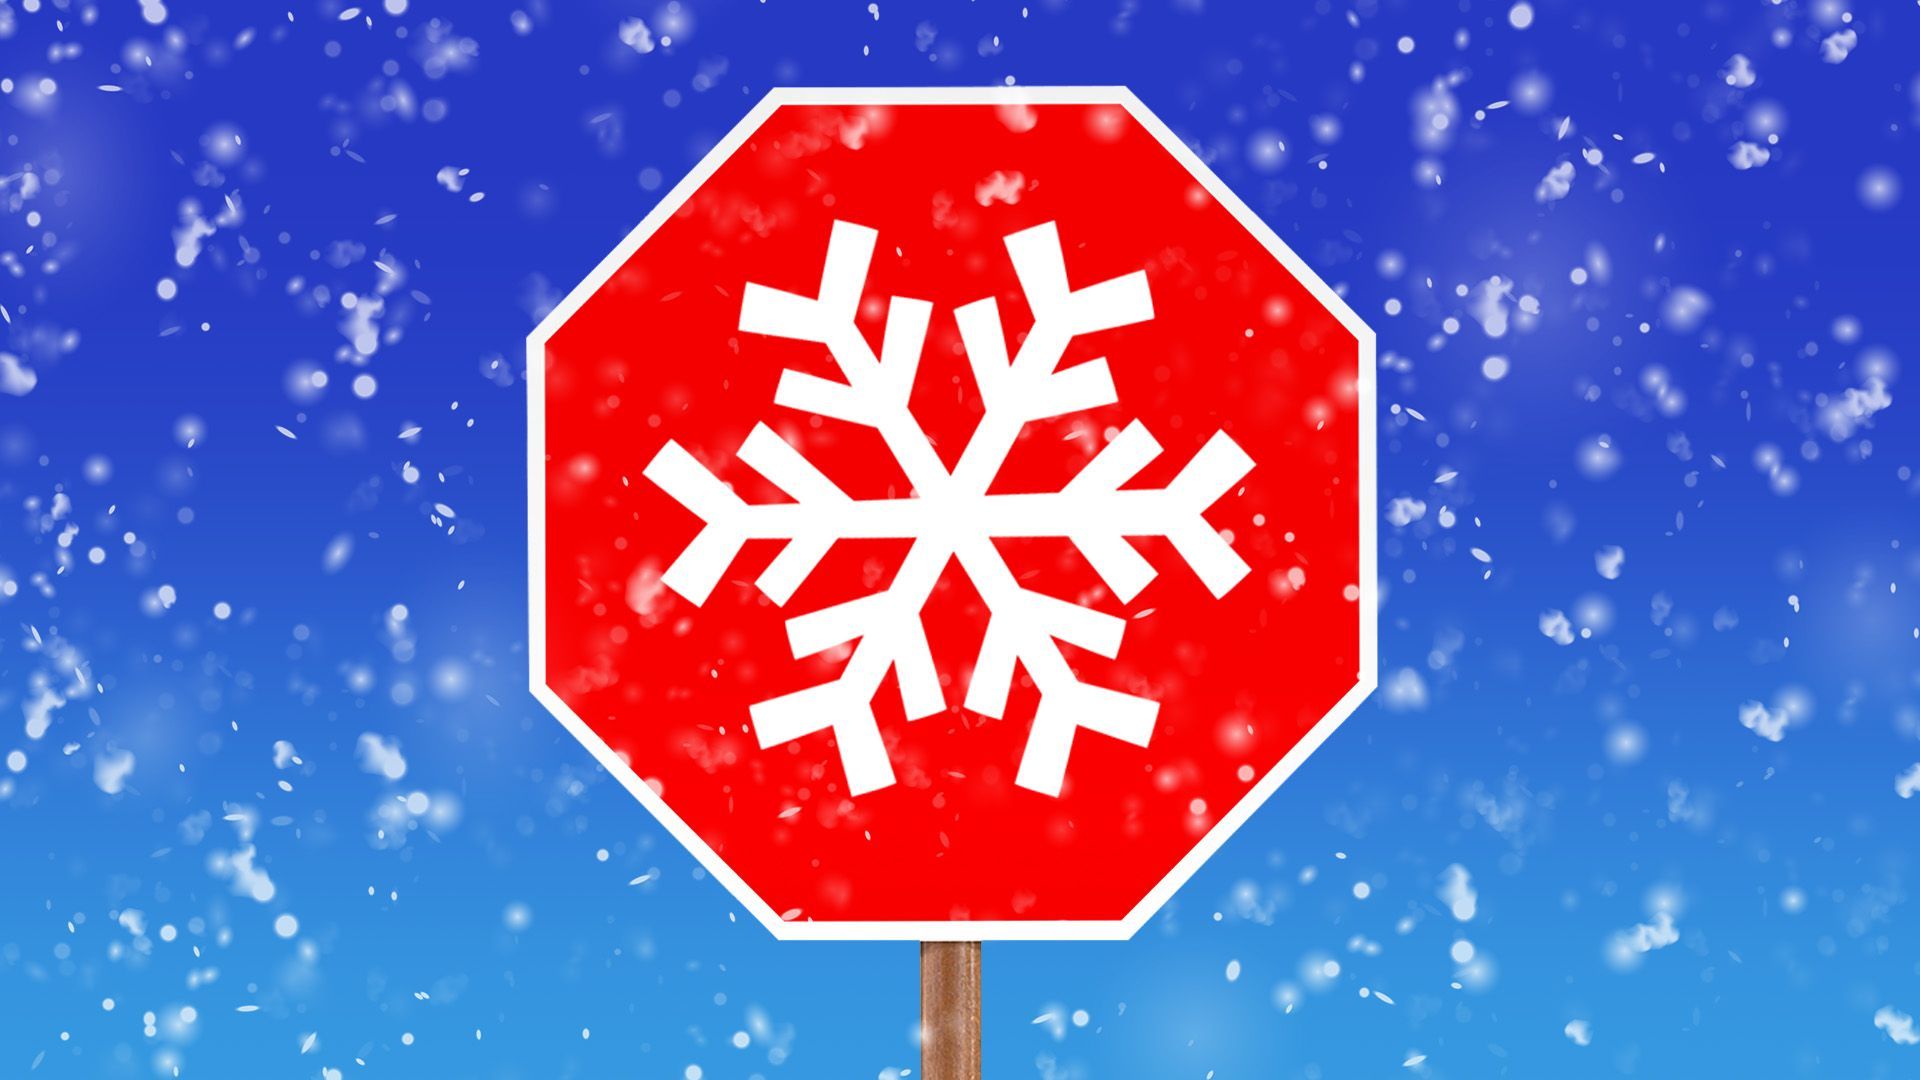 Illustration of a stop sign with a large snowflake on it with smaller flakes falling around it